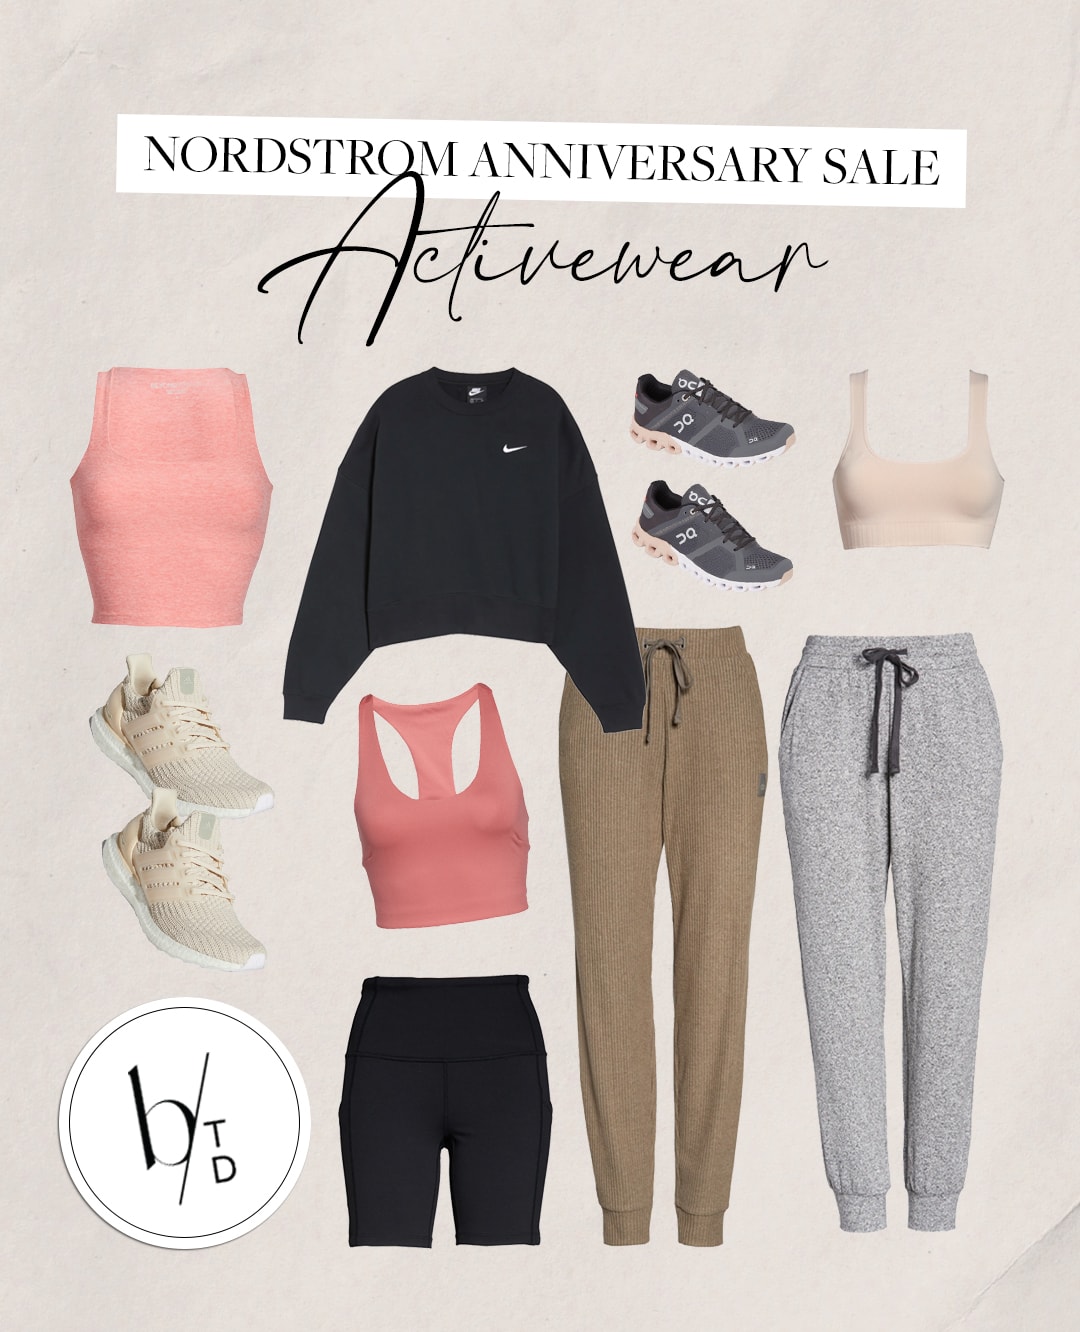 Get the Best Deals on Activewear at the Nordstrom Anniversary Sale